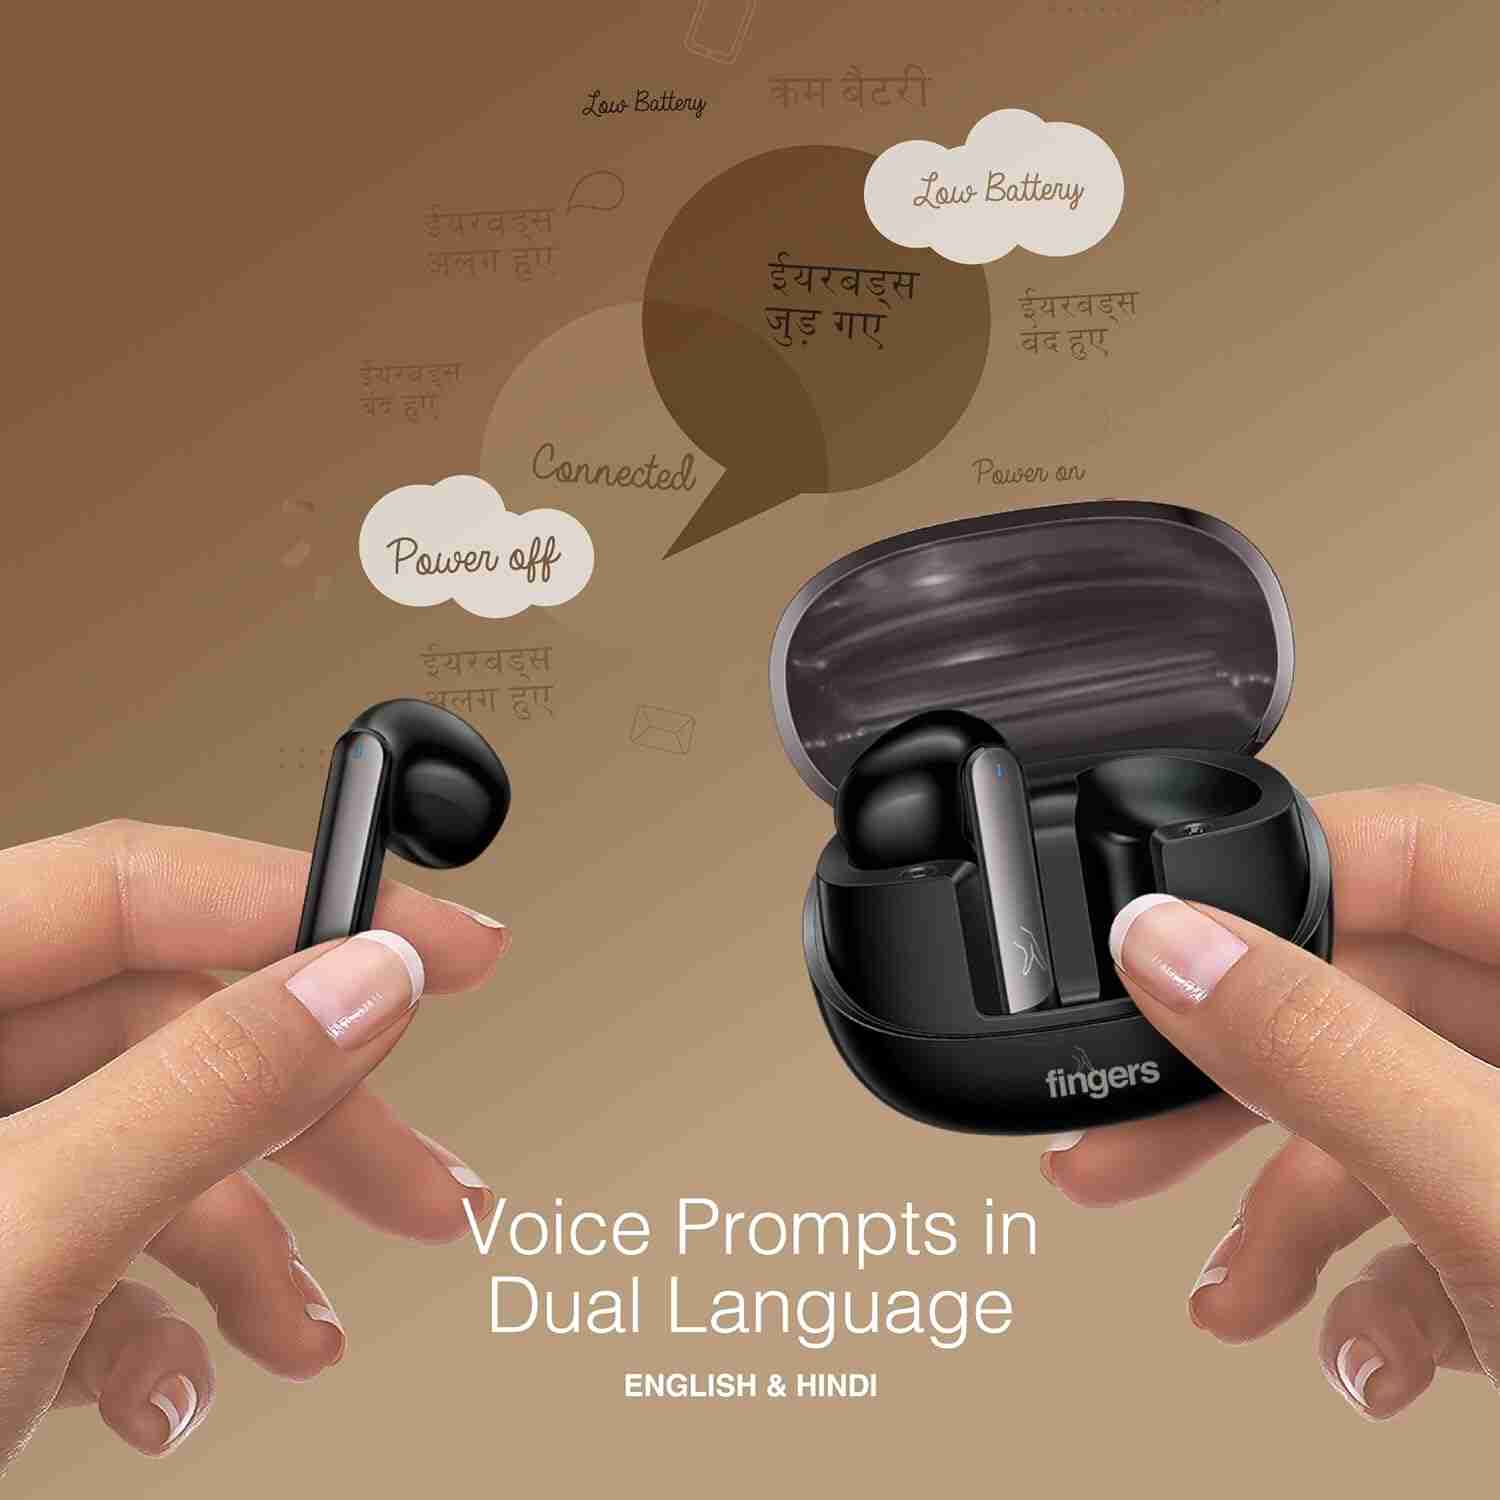 FINGERS Hi-Class TWS Earbuds - Classy | High-Class Sound, 24 Hours Playtime, Surround Noise Cancellation, Dual Language Voice Prompts, Intuitive Touch Controls (Gun Metal + Piano Black)